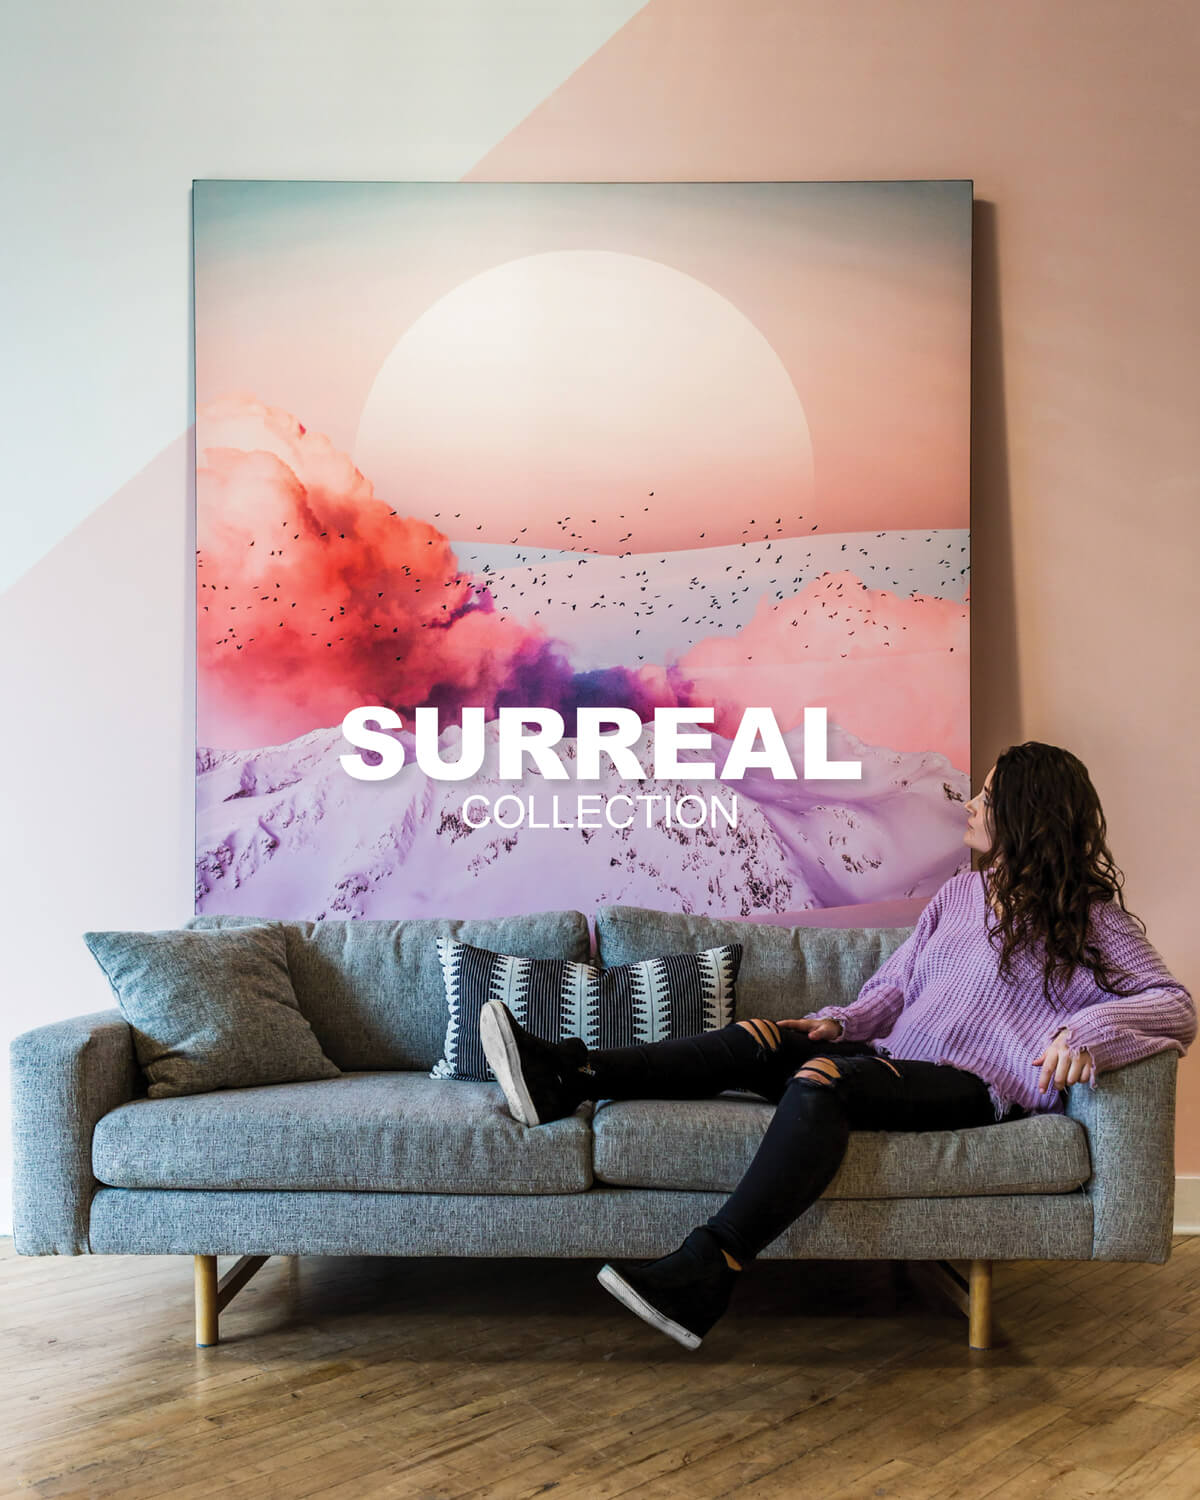 Large Pink Surreal Artwork hung up on the wall behind a couch